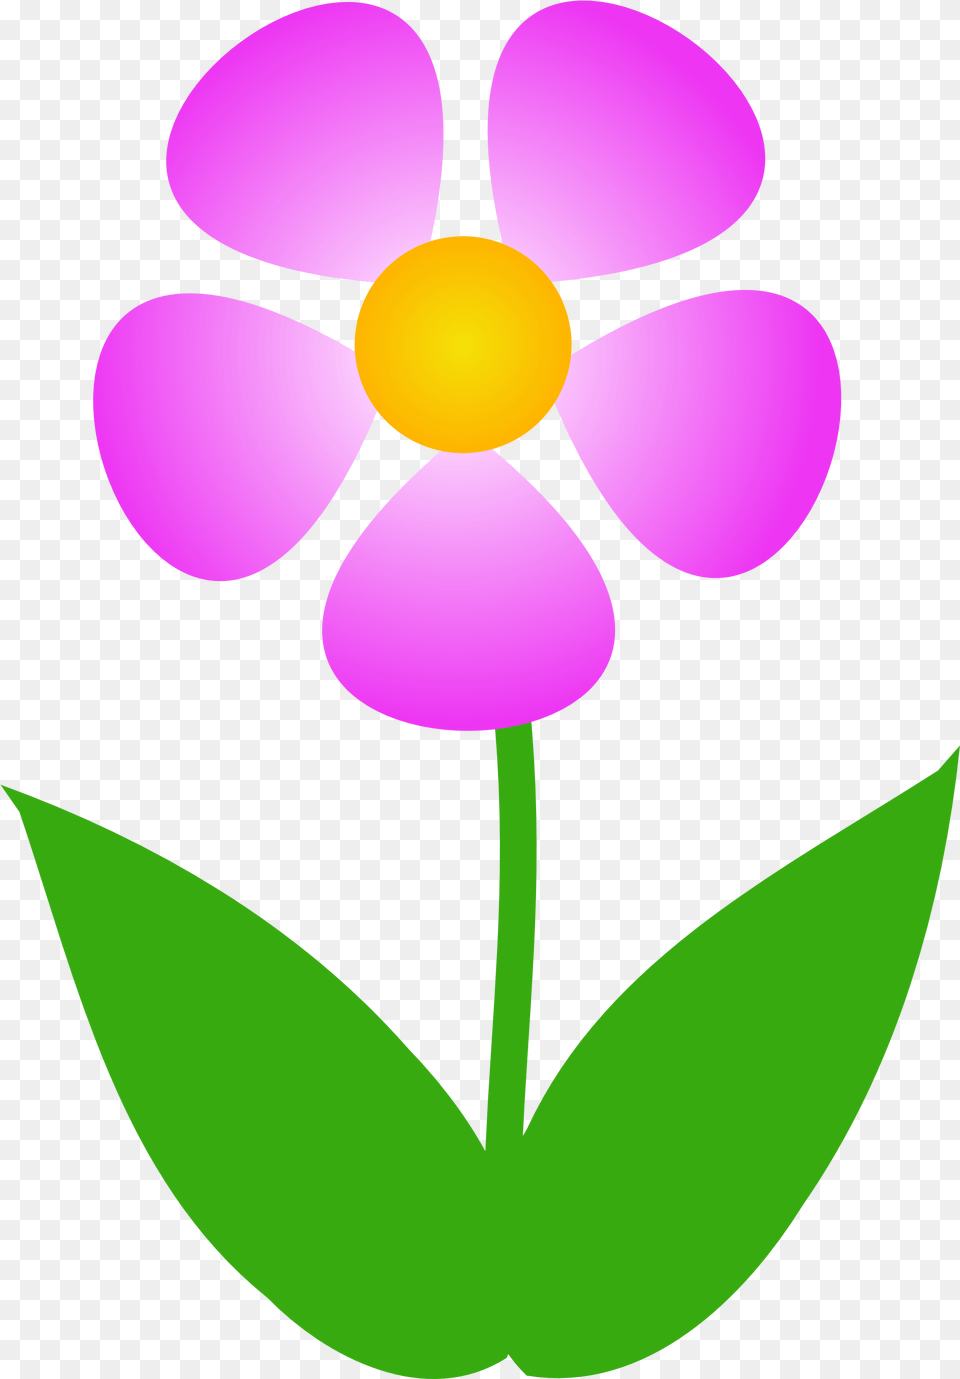 Free Clipart Images Of Flowers Flower Flower, Anemone, Daisy, Petal, Plant Png Image